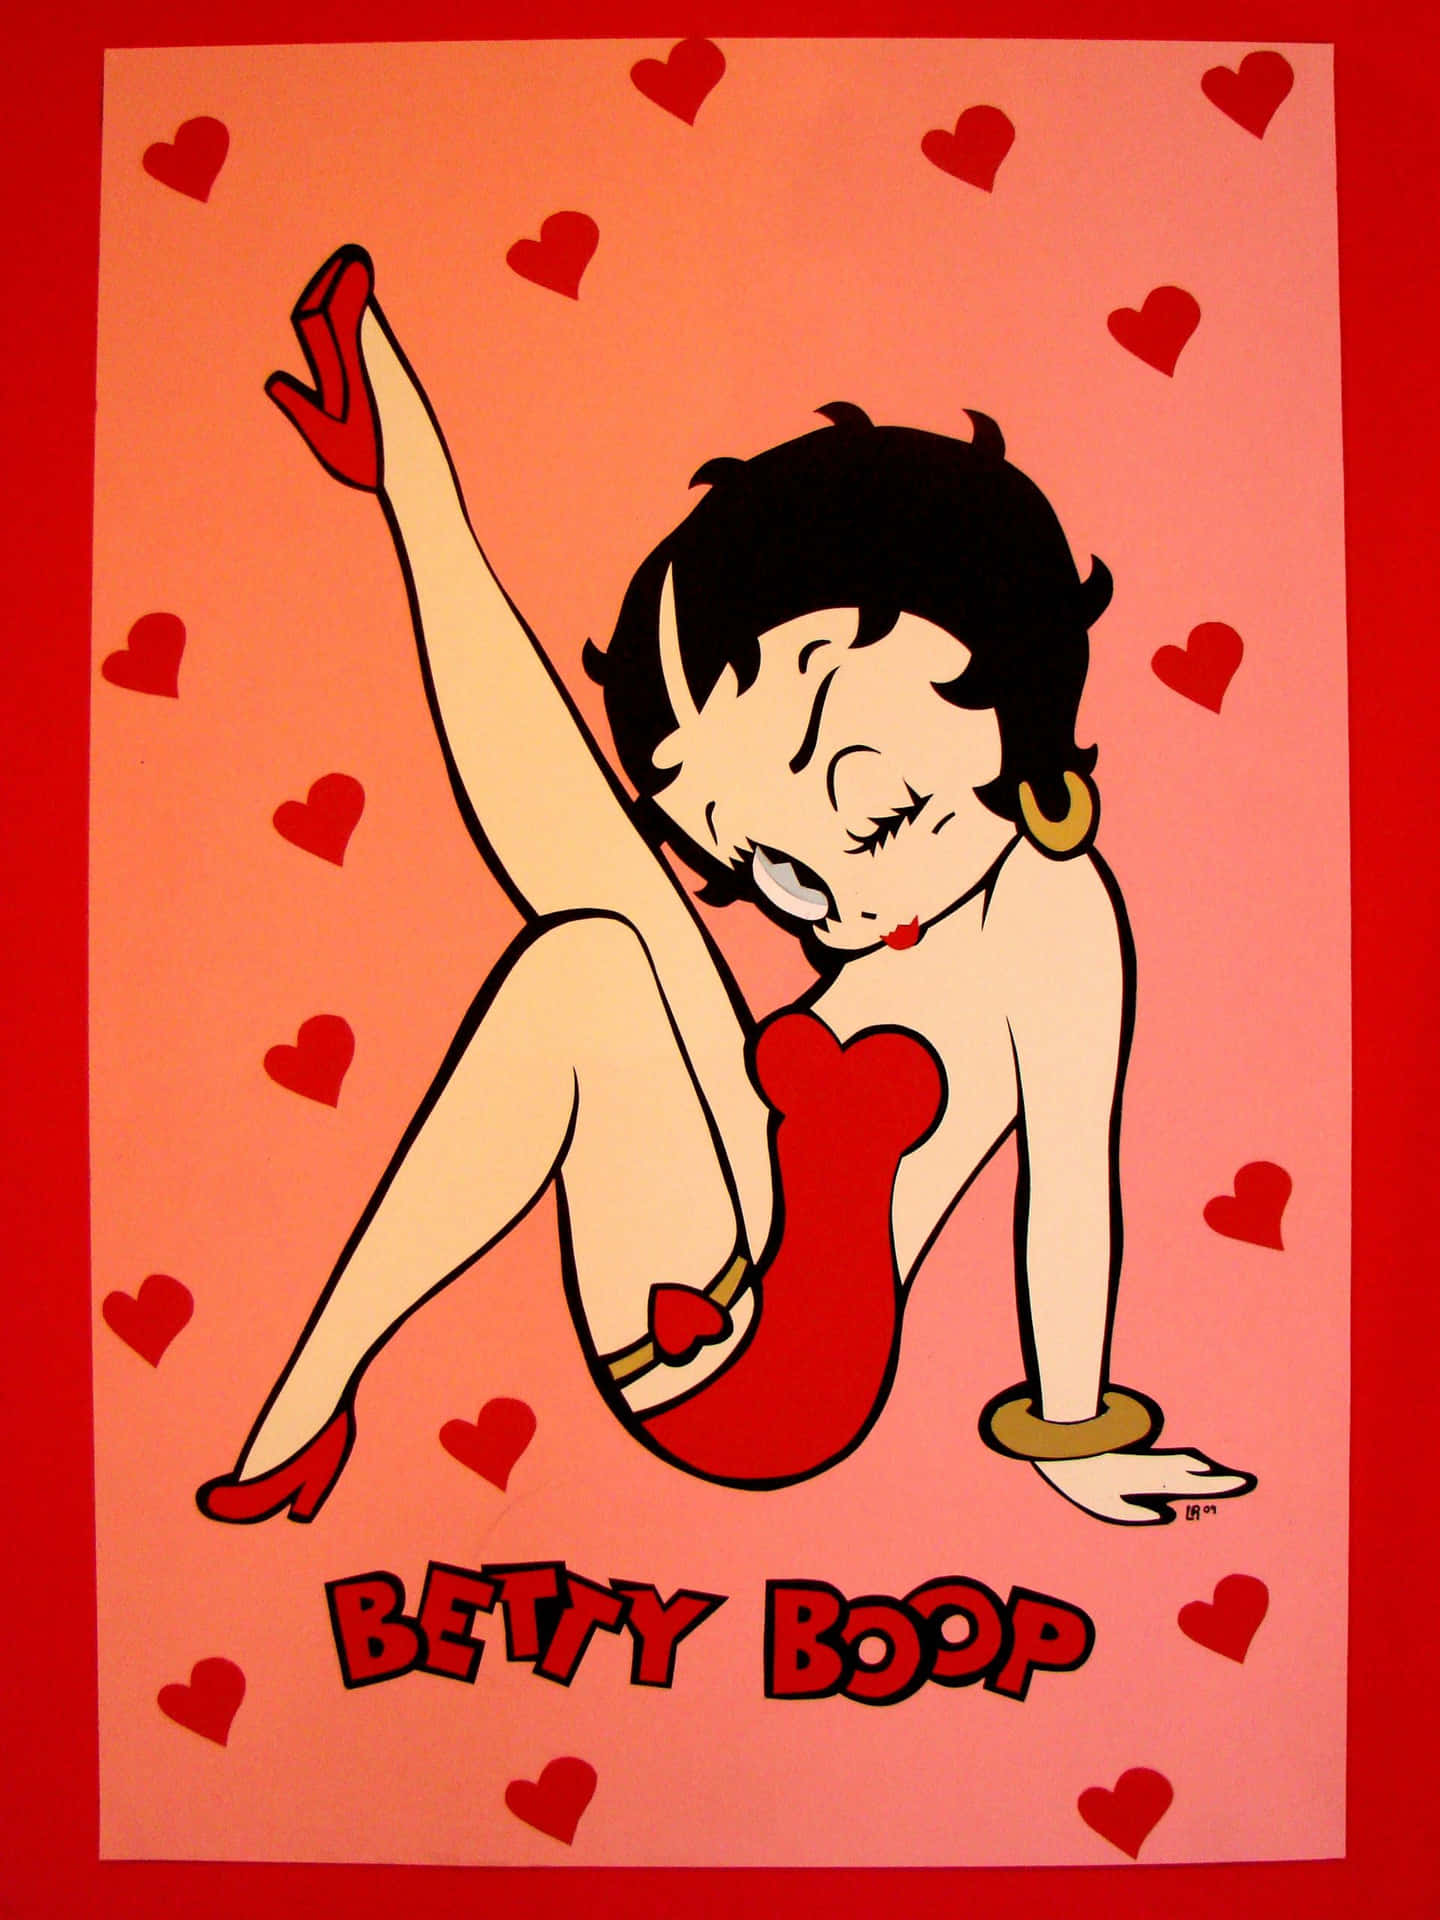 A sultry pinup of Betty Boop